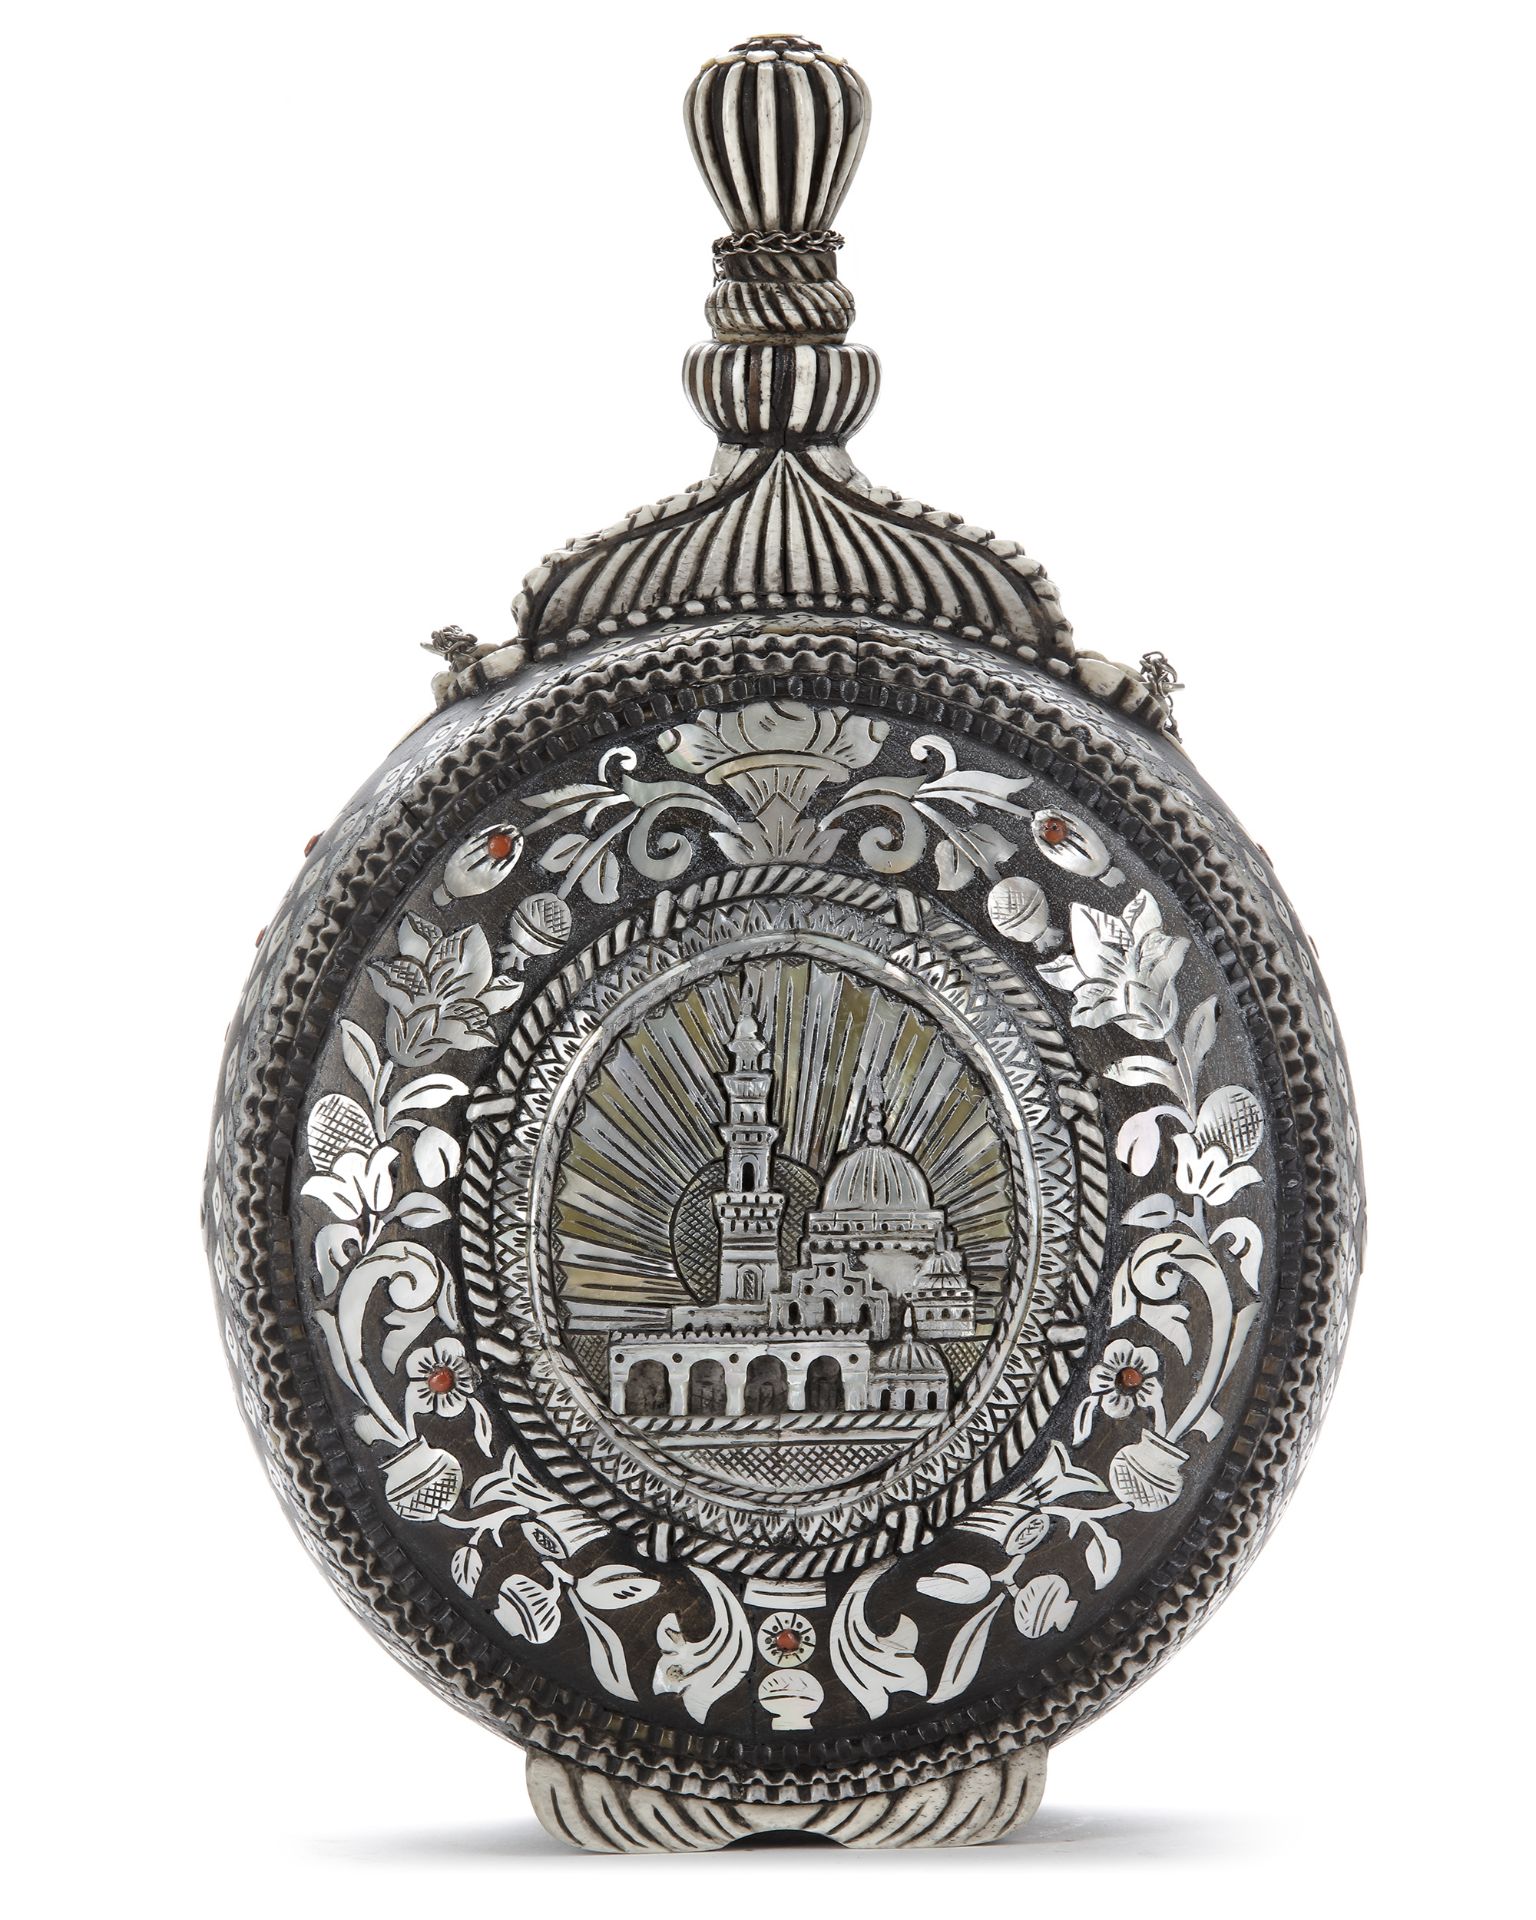 AN OTTOMAN MOTHER-OF-PEARL WOODEN MOON FLASK, EARLY 20TH CENTURY - Image 3 of 4